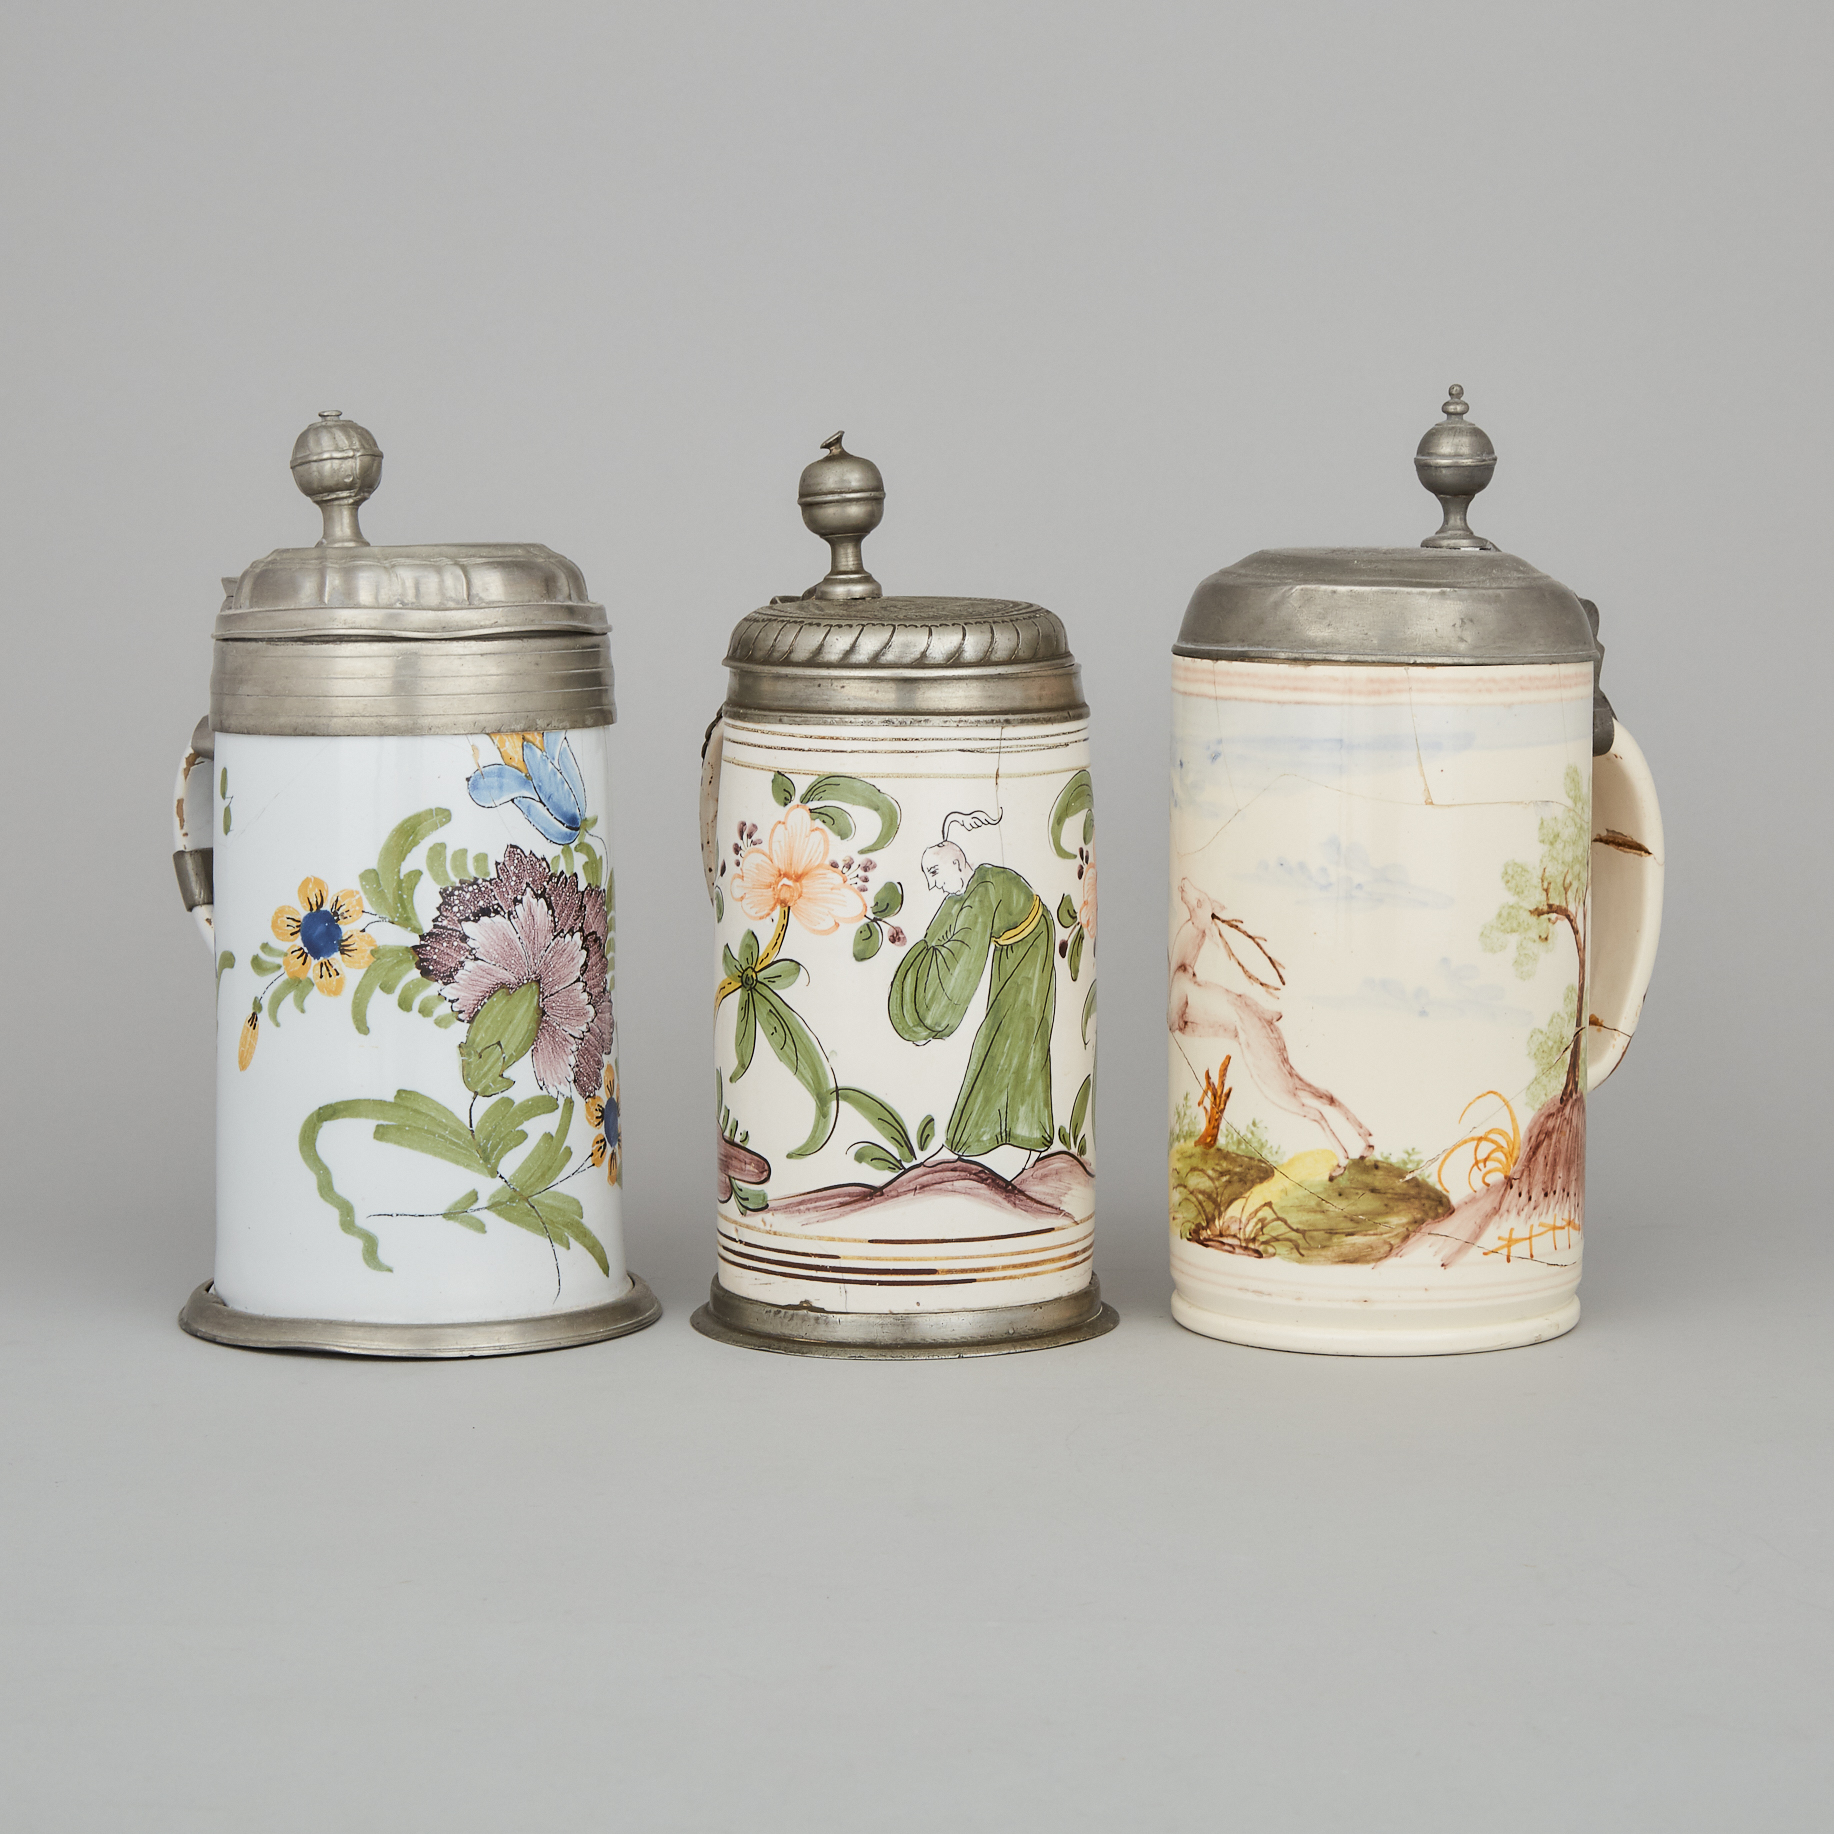 Three German Pewter Mounted Faience Steins, late 18th/early 19th century